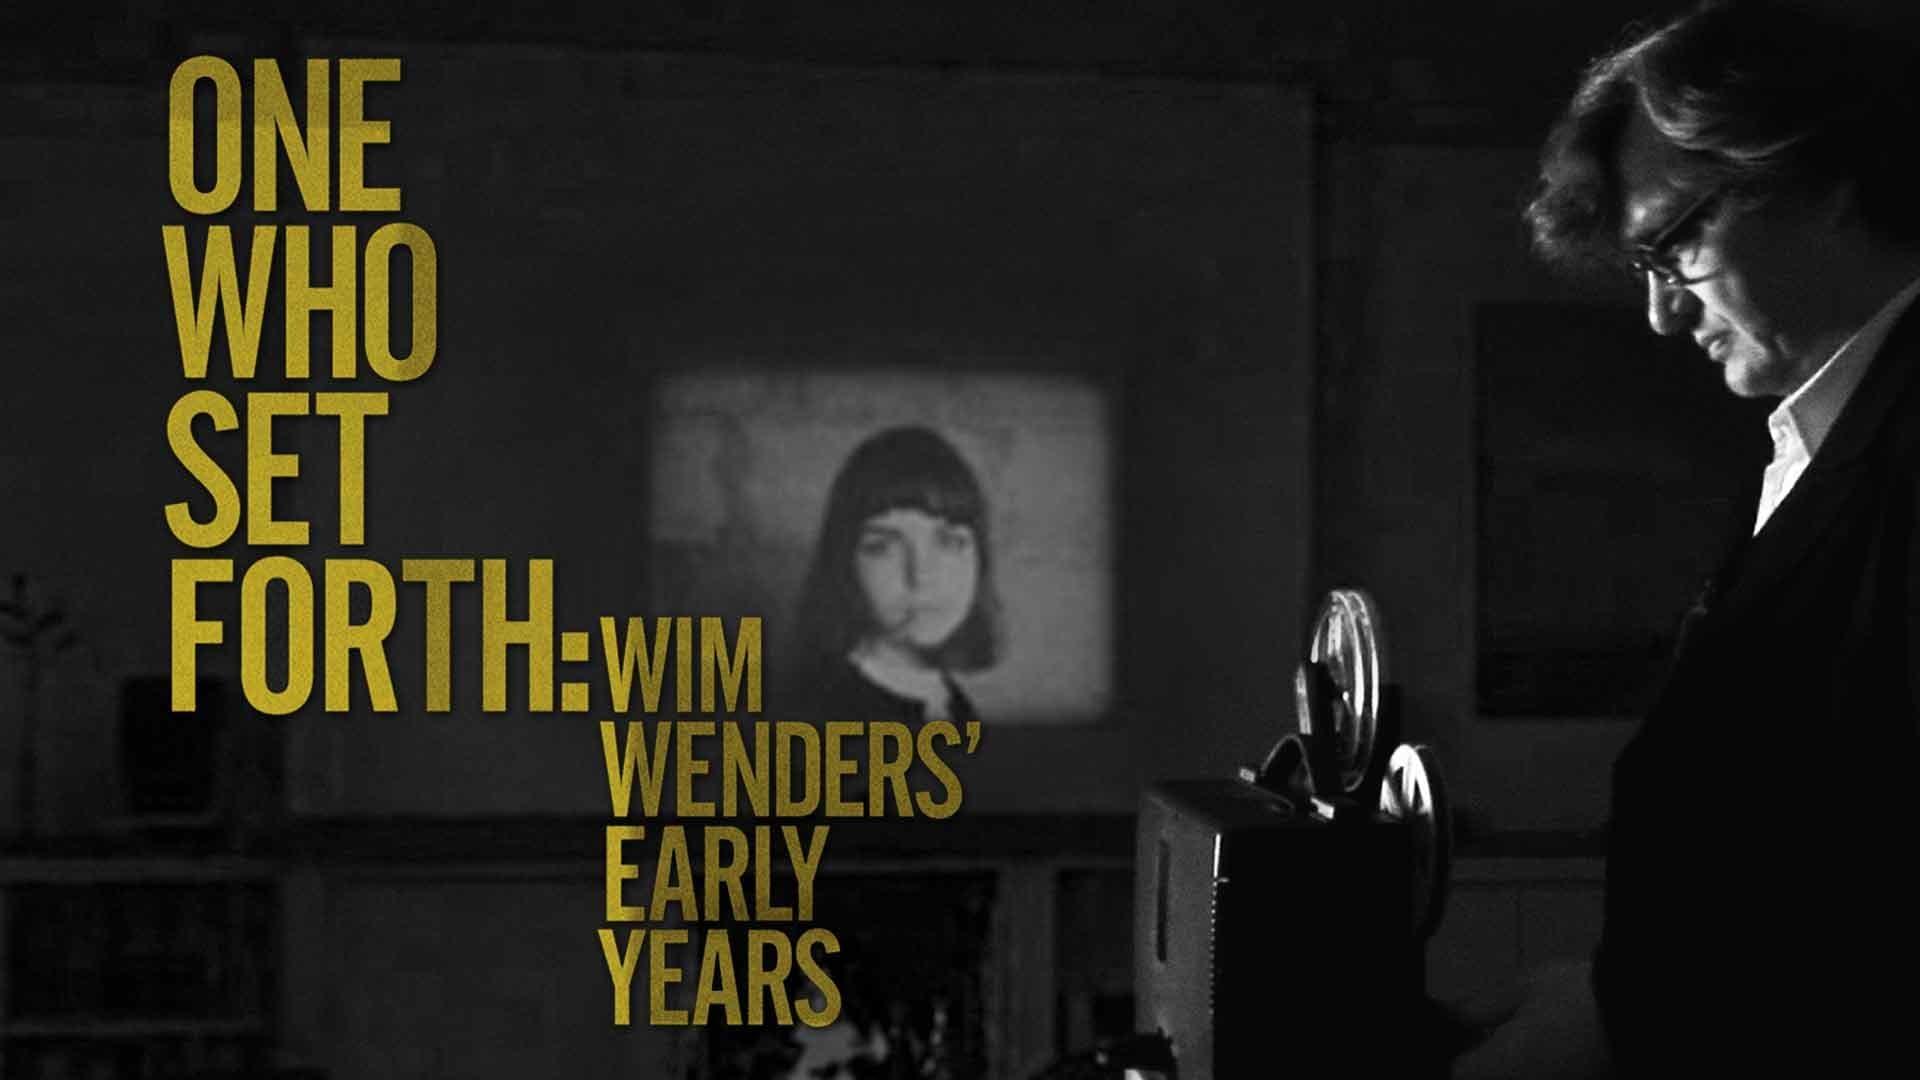 One Who Set Forth: Wim Wenders' Early Years backdrop